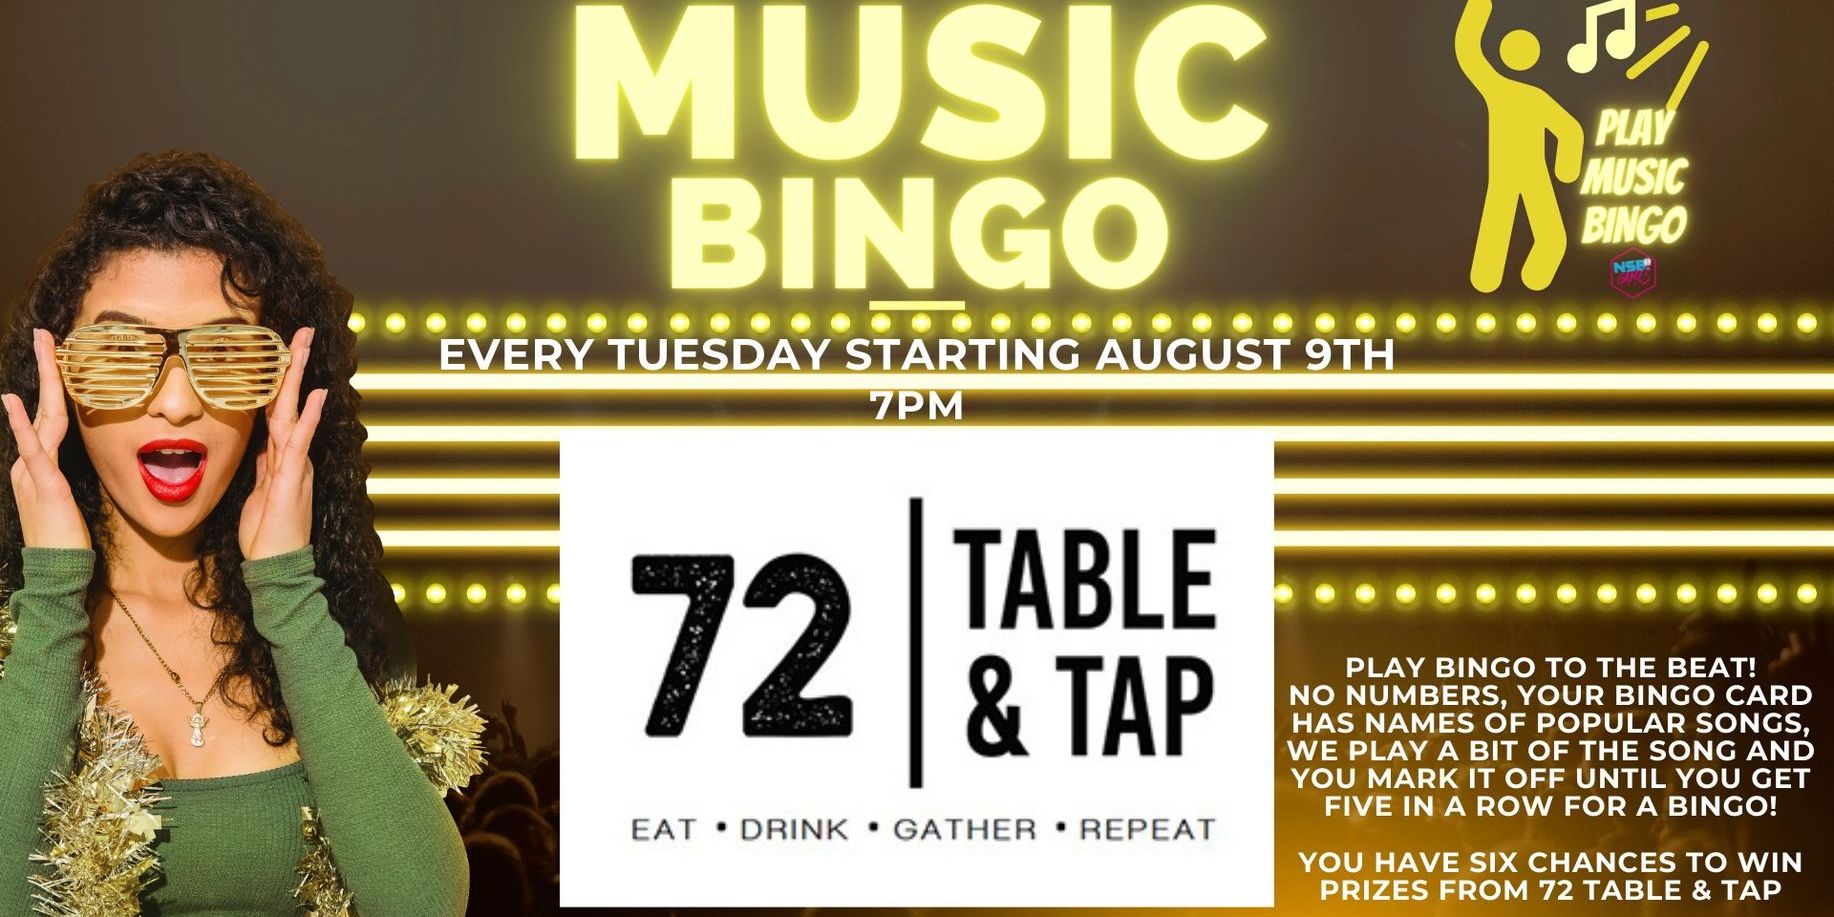 Music Bingo at 72 Table & Tap promotional image